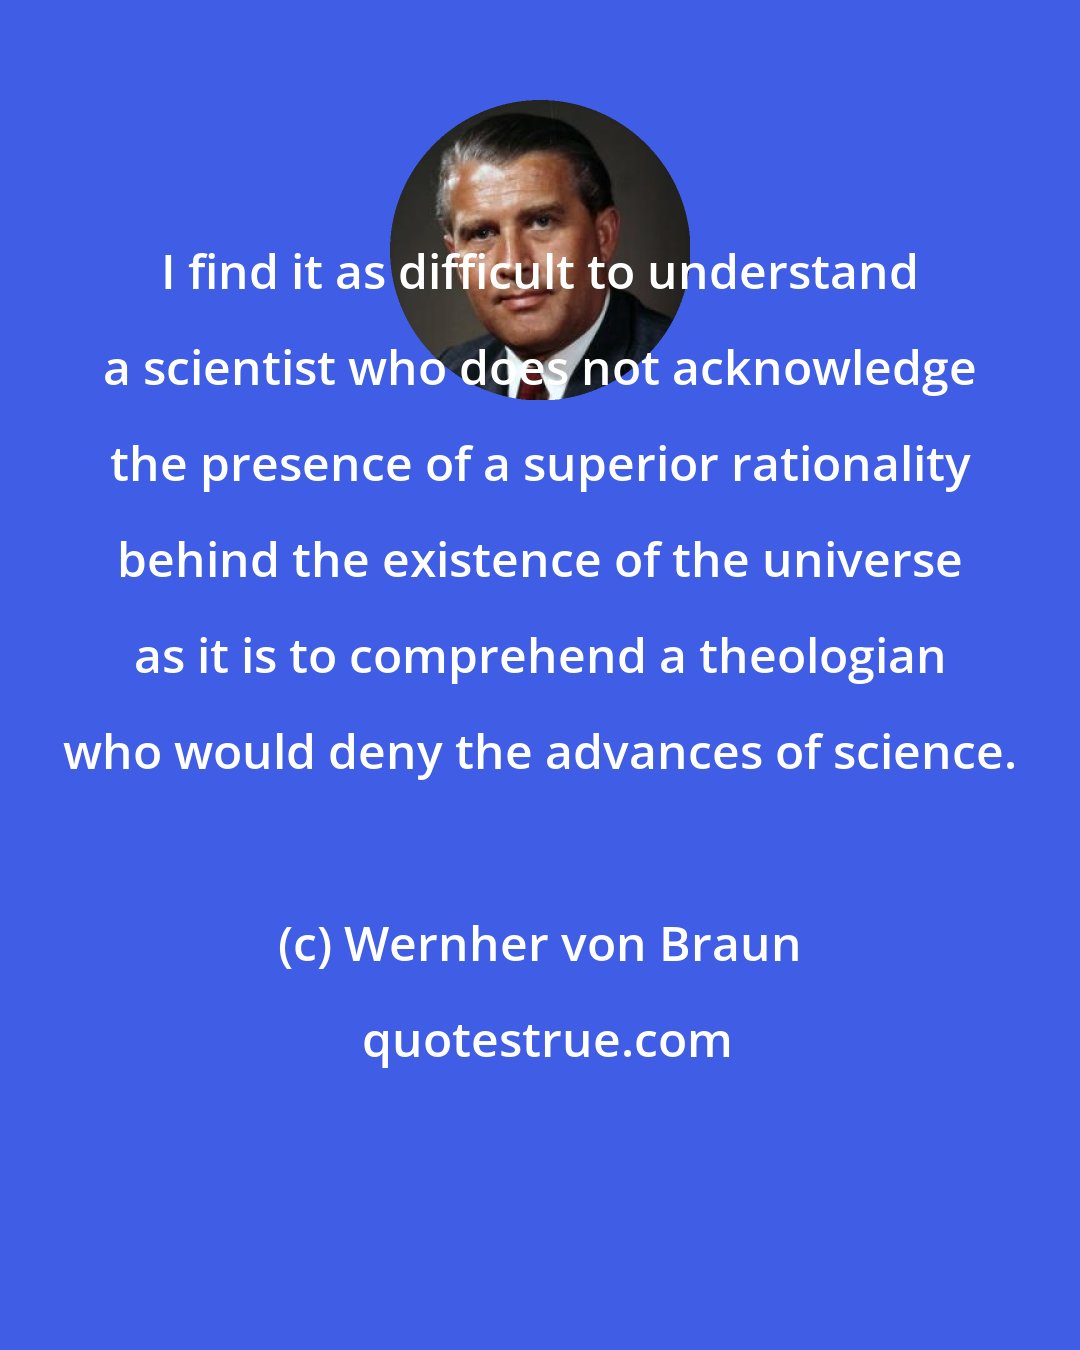 Wernher von Braun: I find it as difficult to understand a scientist who does not acknowledge the presence of a superior rationality behind the existence of the universe as it is to comprehend a theologian who would deny the advances of science.